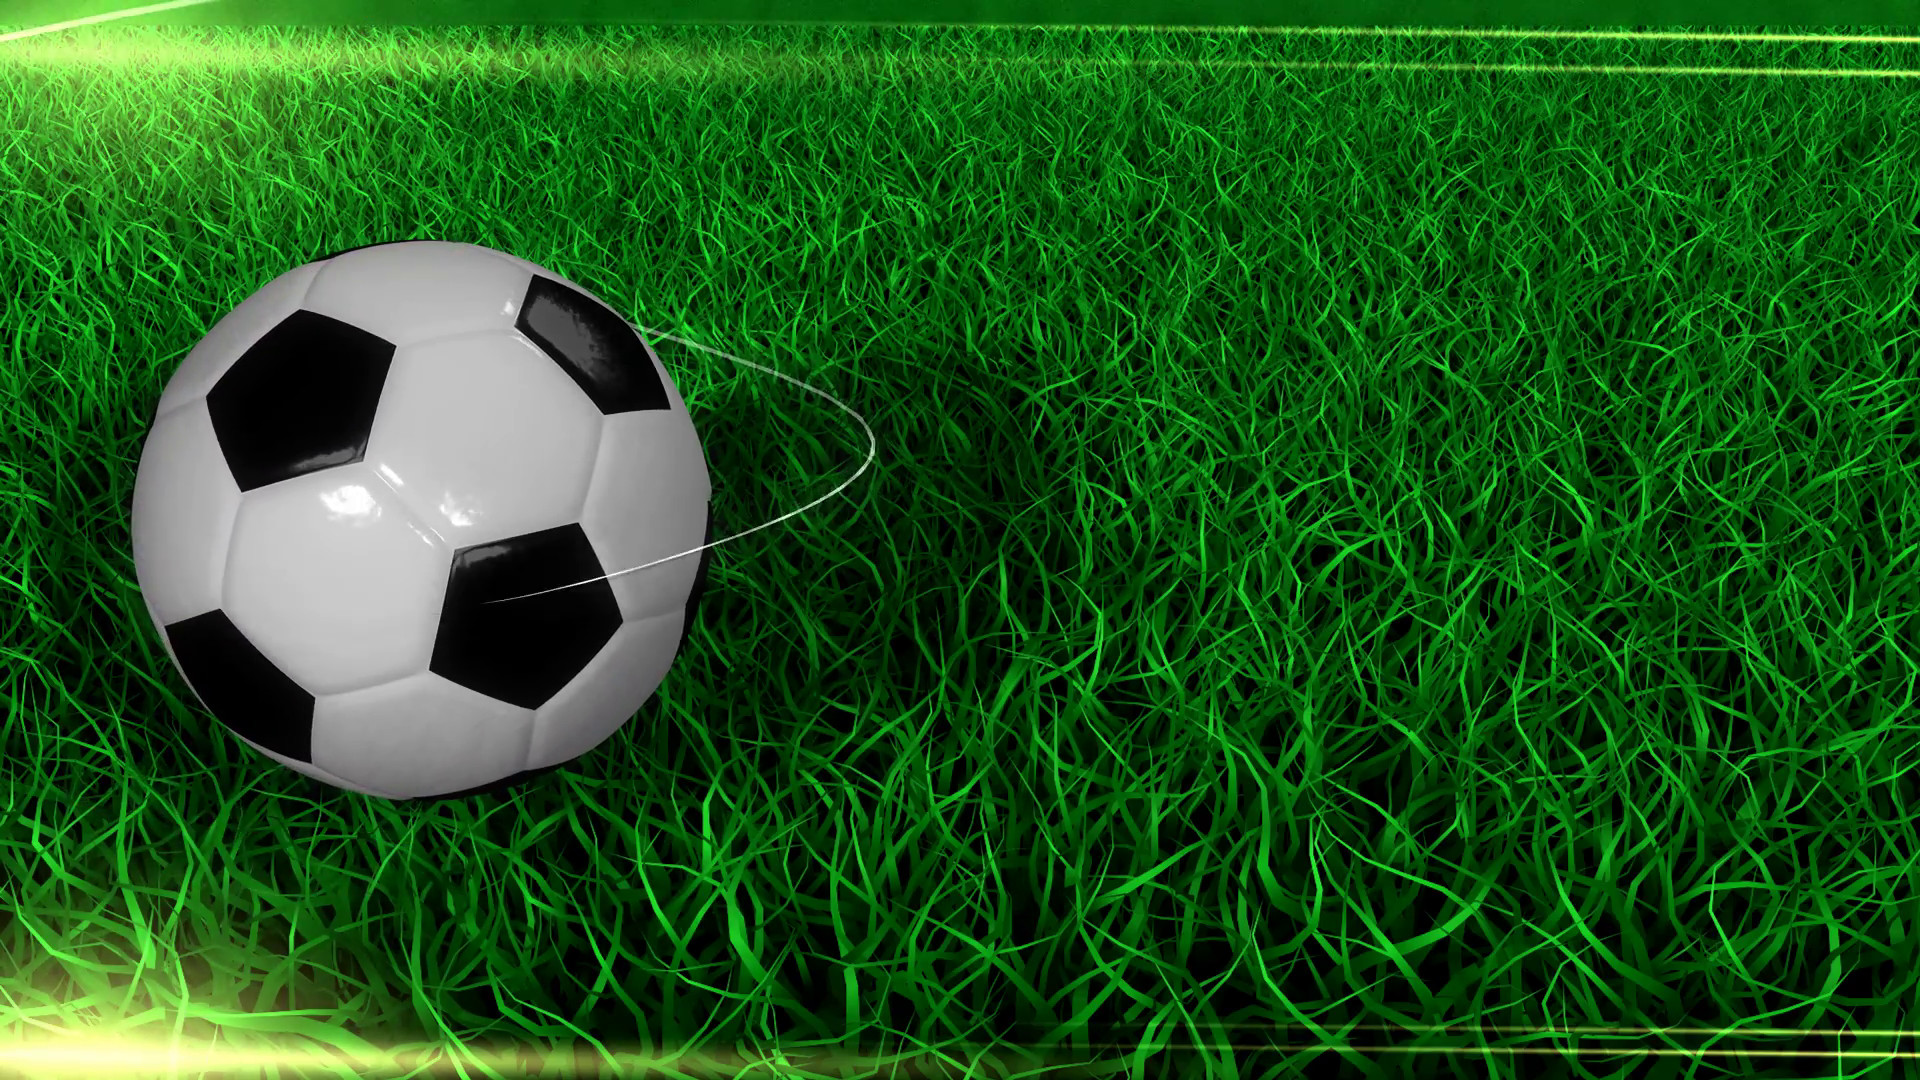 1920x1080 Subscription Library Sports background, soccer, ball, field, grass.